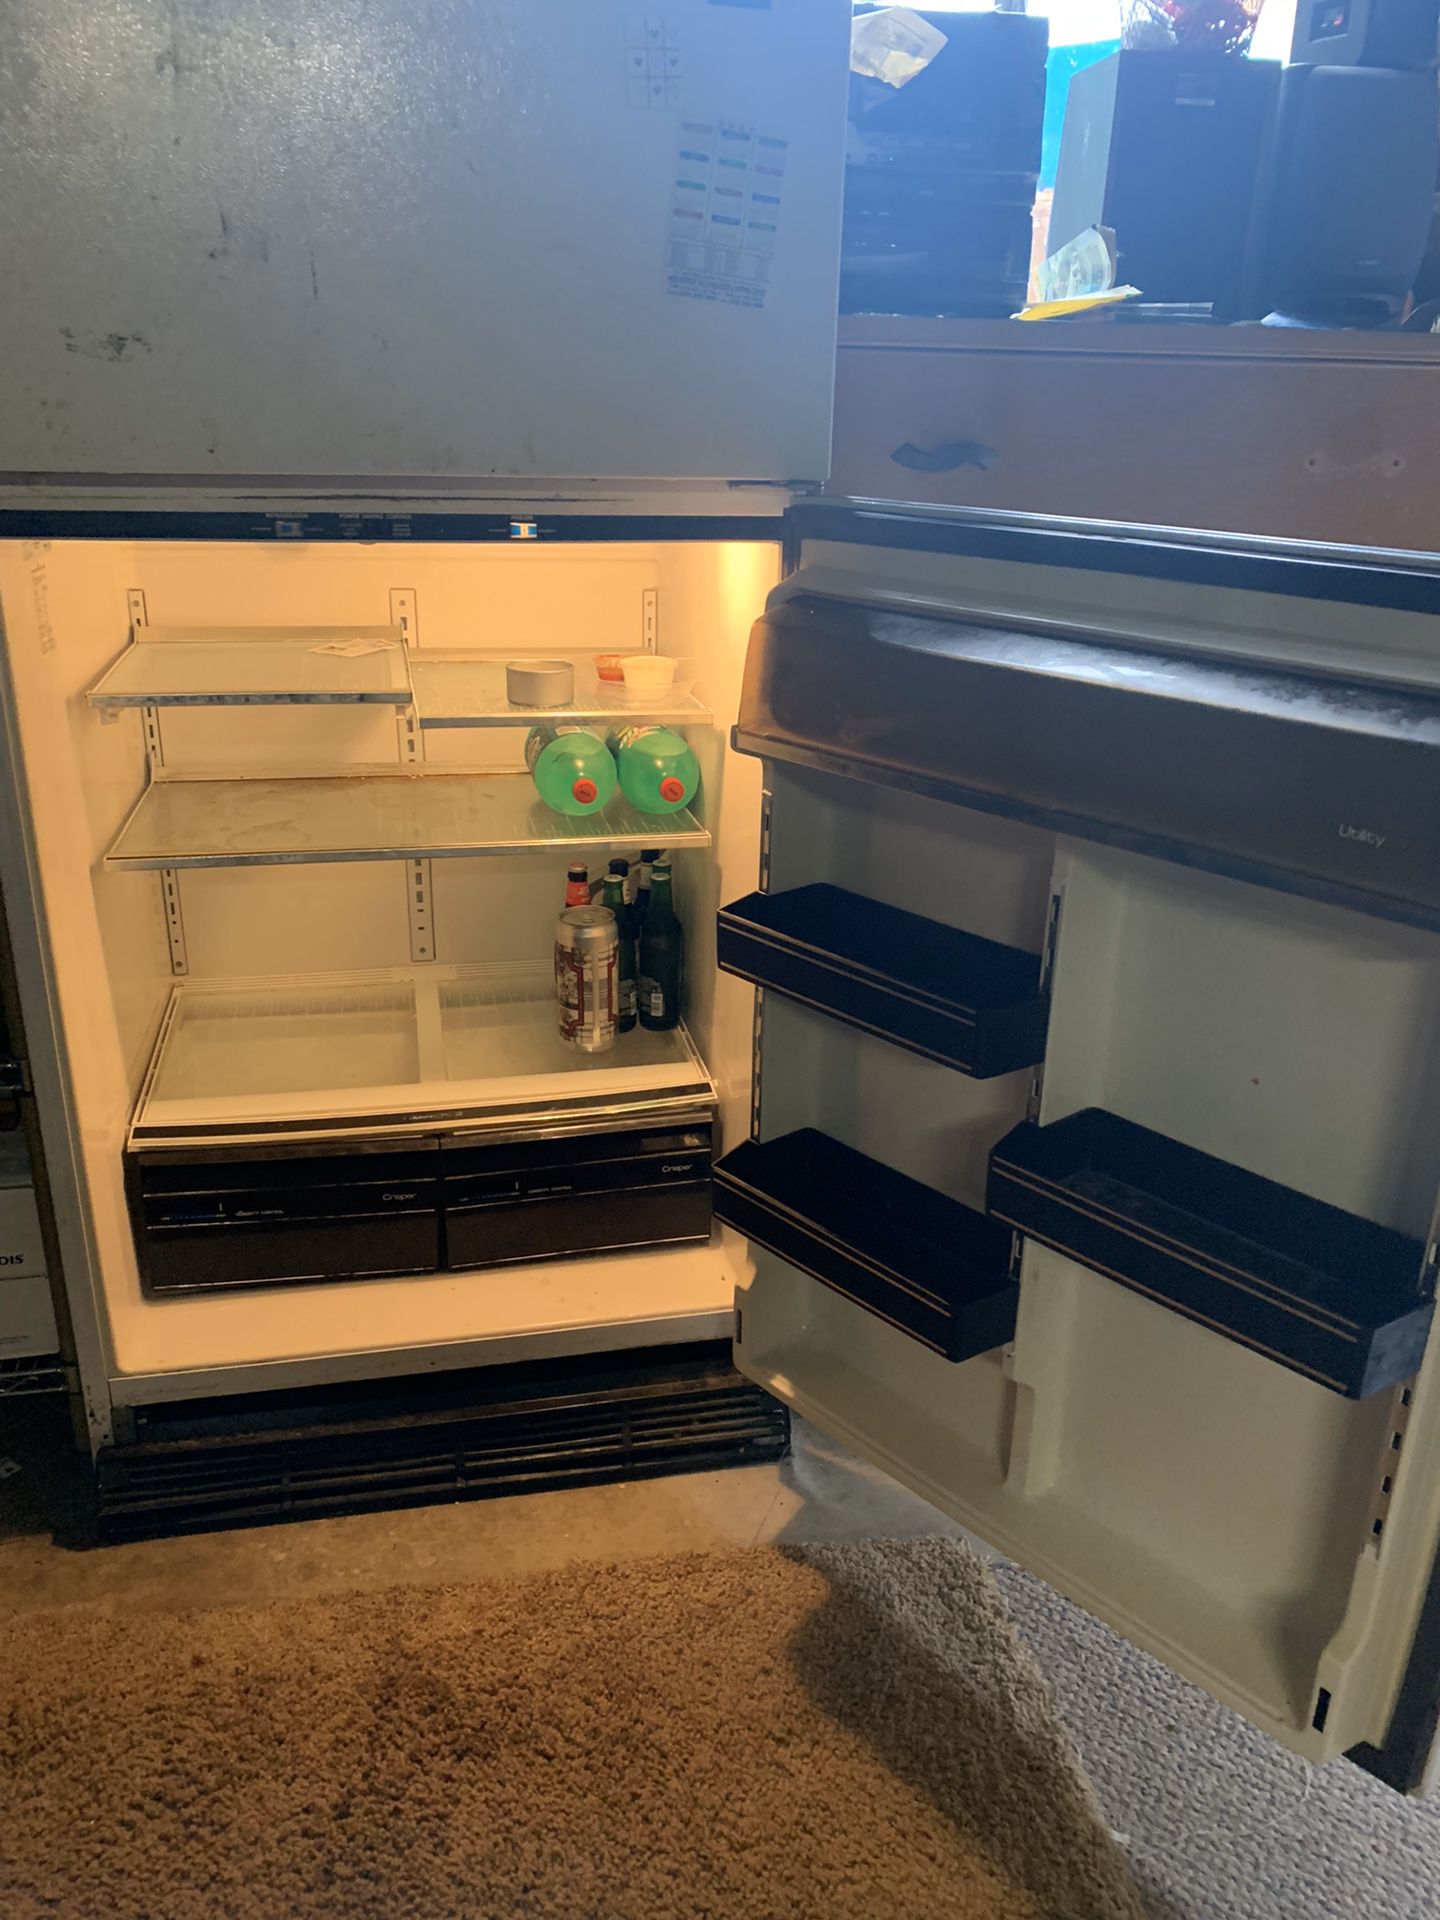 22 cu ft Whirlpool refrigerator/ freezer. Works great, no ice maker, u-haul. Free!! Contact Johnny at . Located in north Renton, o